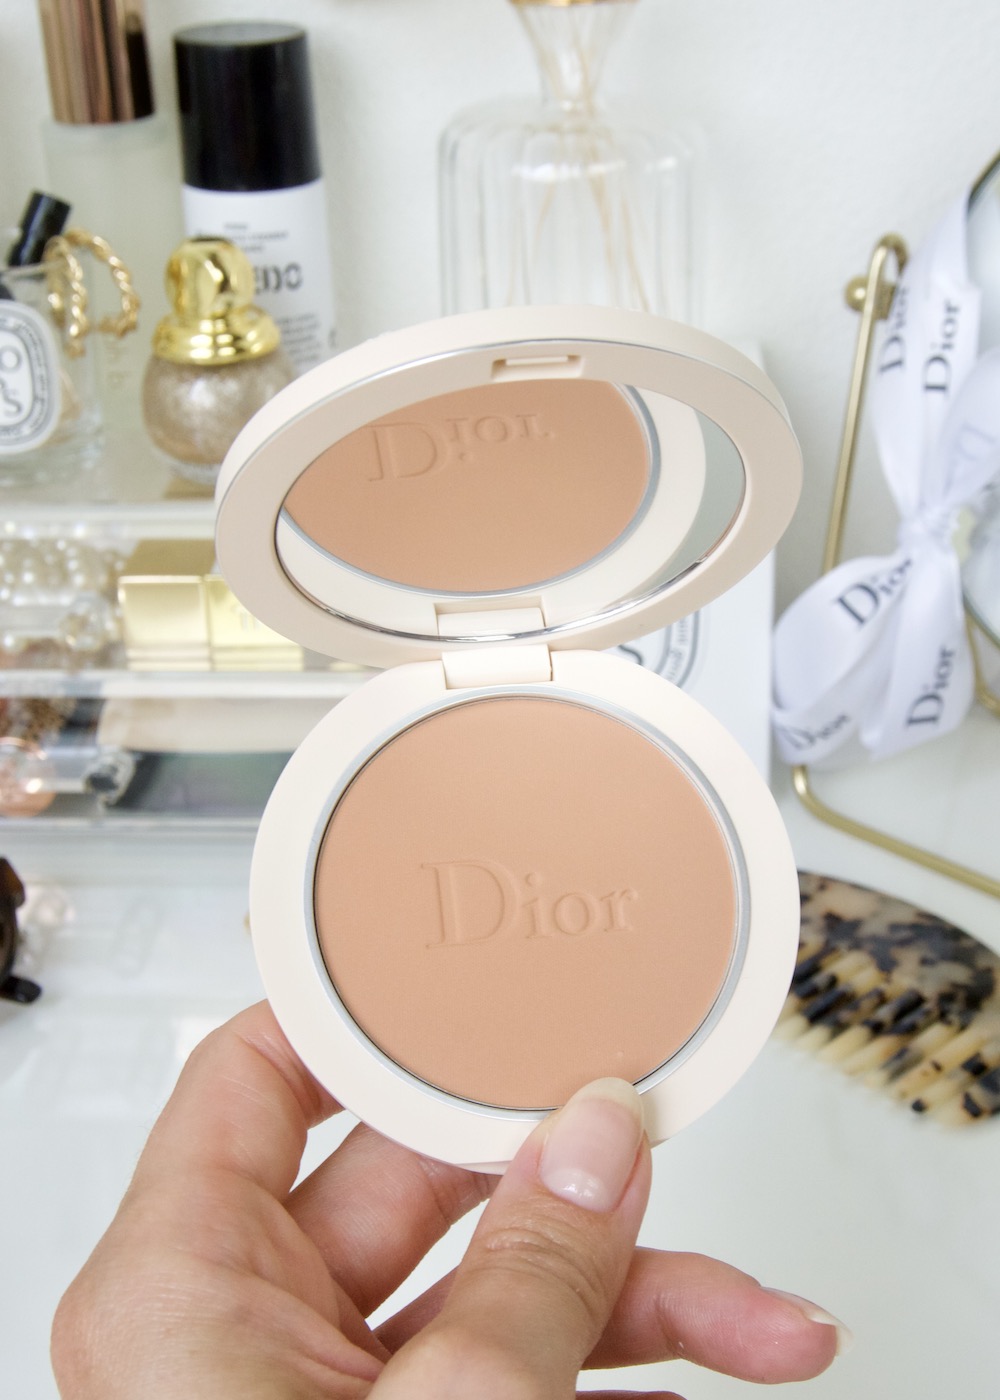 Dior Forever Natural Bronze Bronzer Review